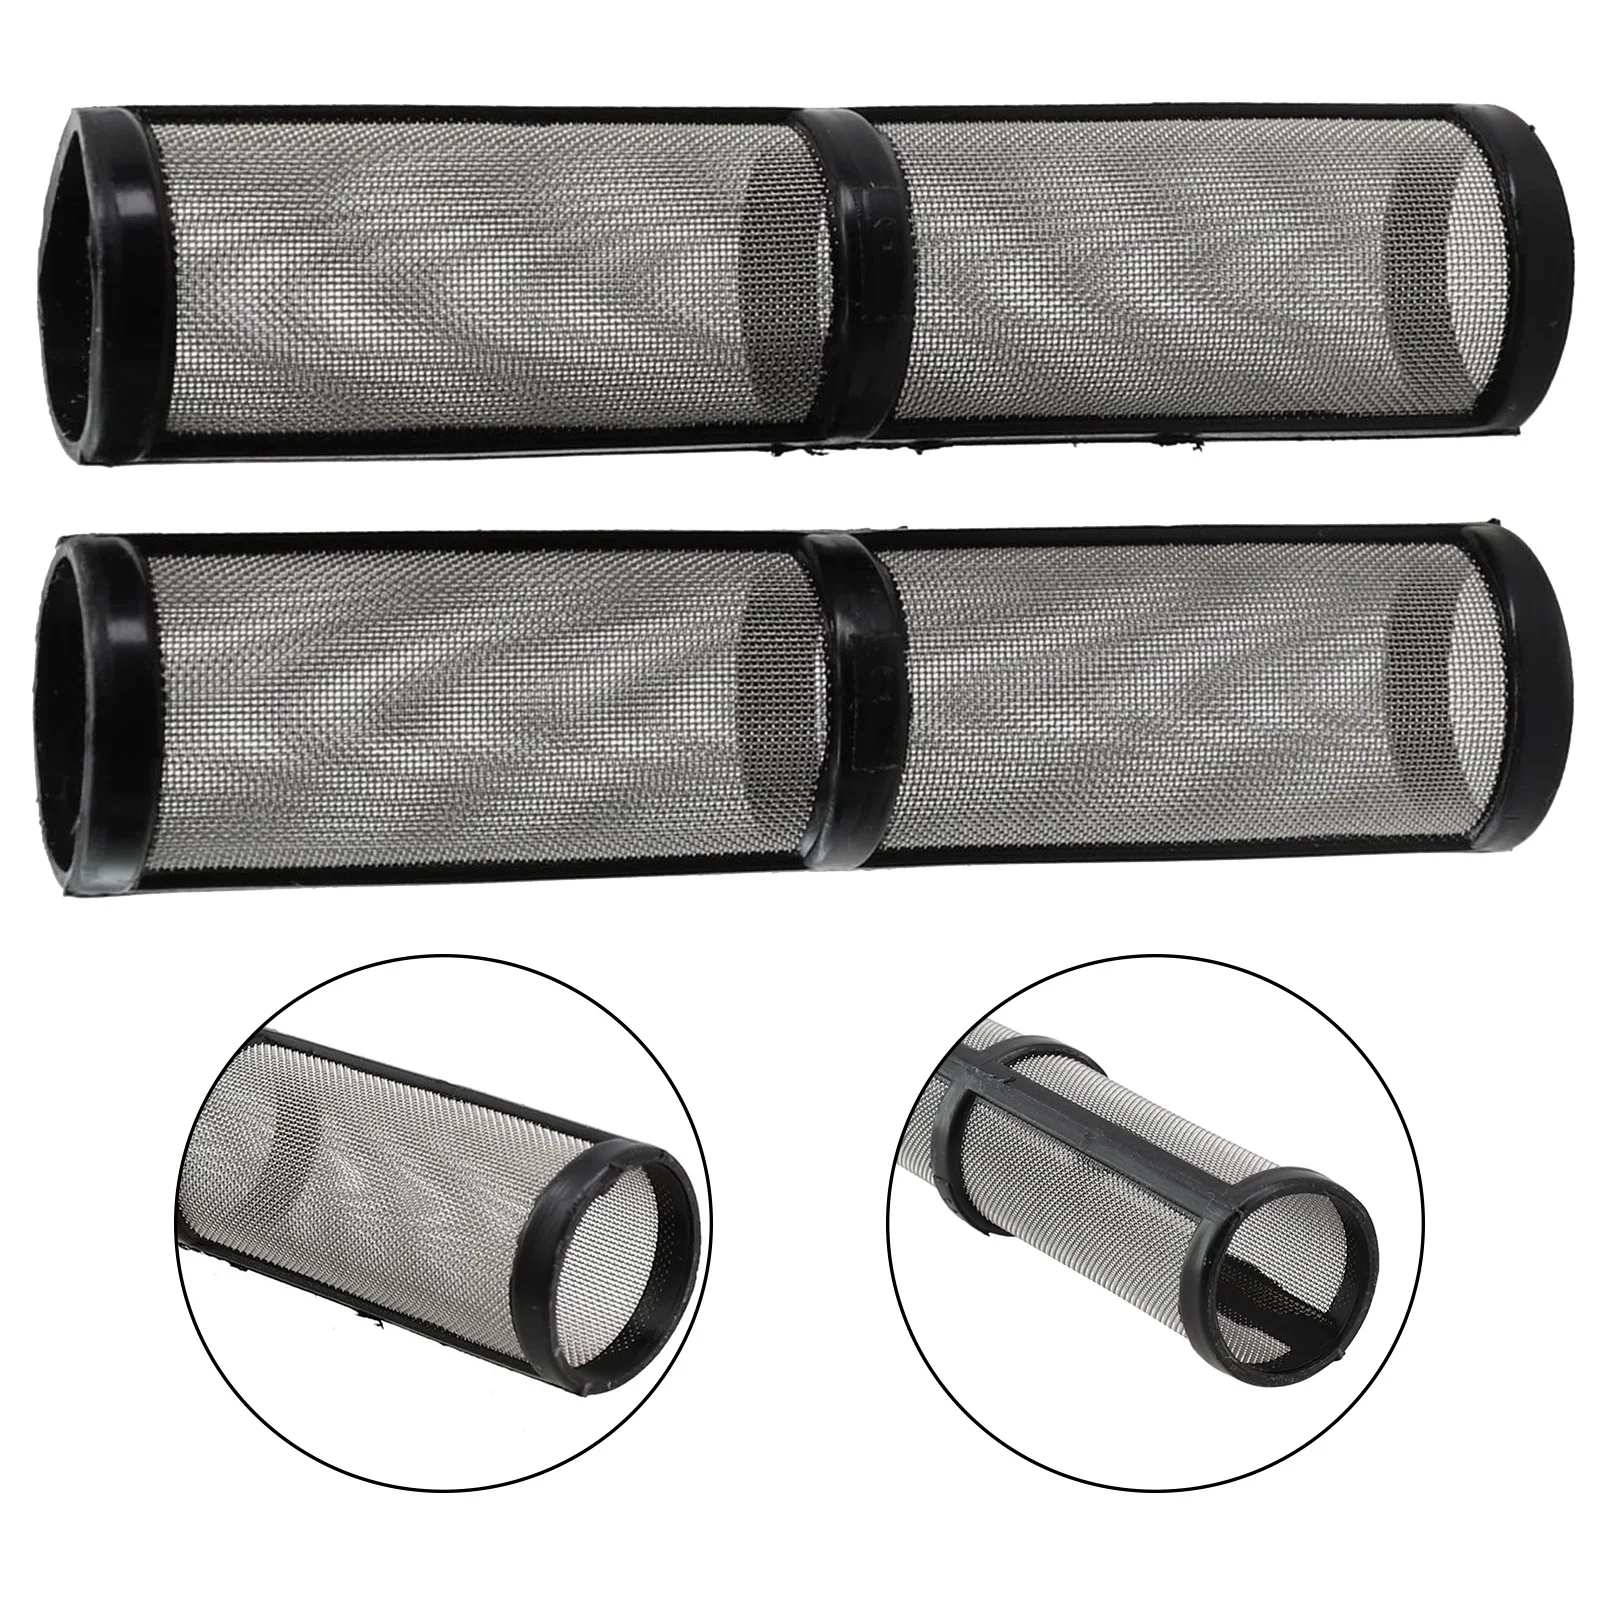 Efficiently Filter Coating Materials with 2pcs Mesh Airless Electric Paint Sprayer Filters for G390 G395 G495 G595 2pcs rv heater vent screen covers accessories for ventilation with installation insectss stainless steel mesh guard with tools